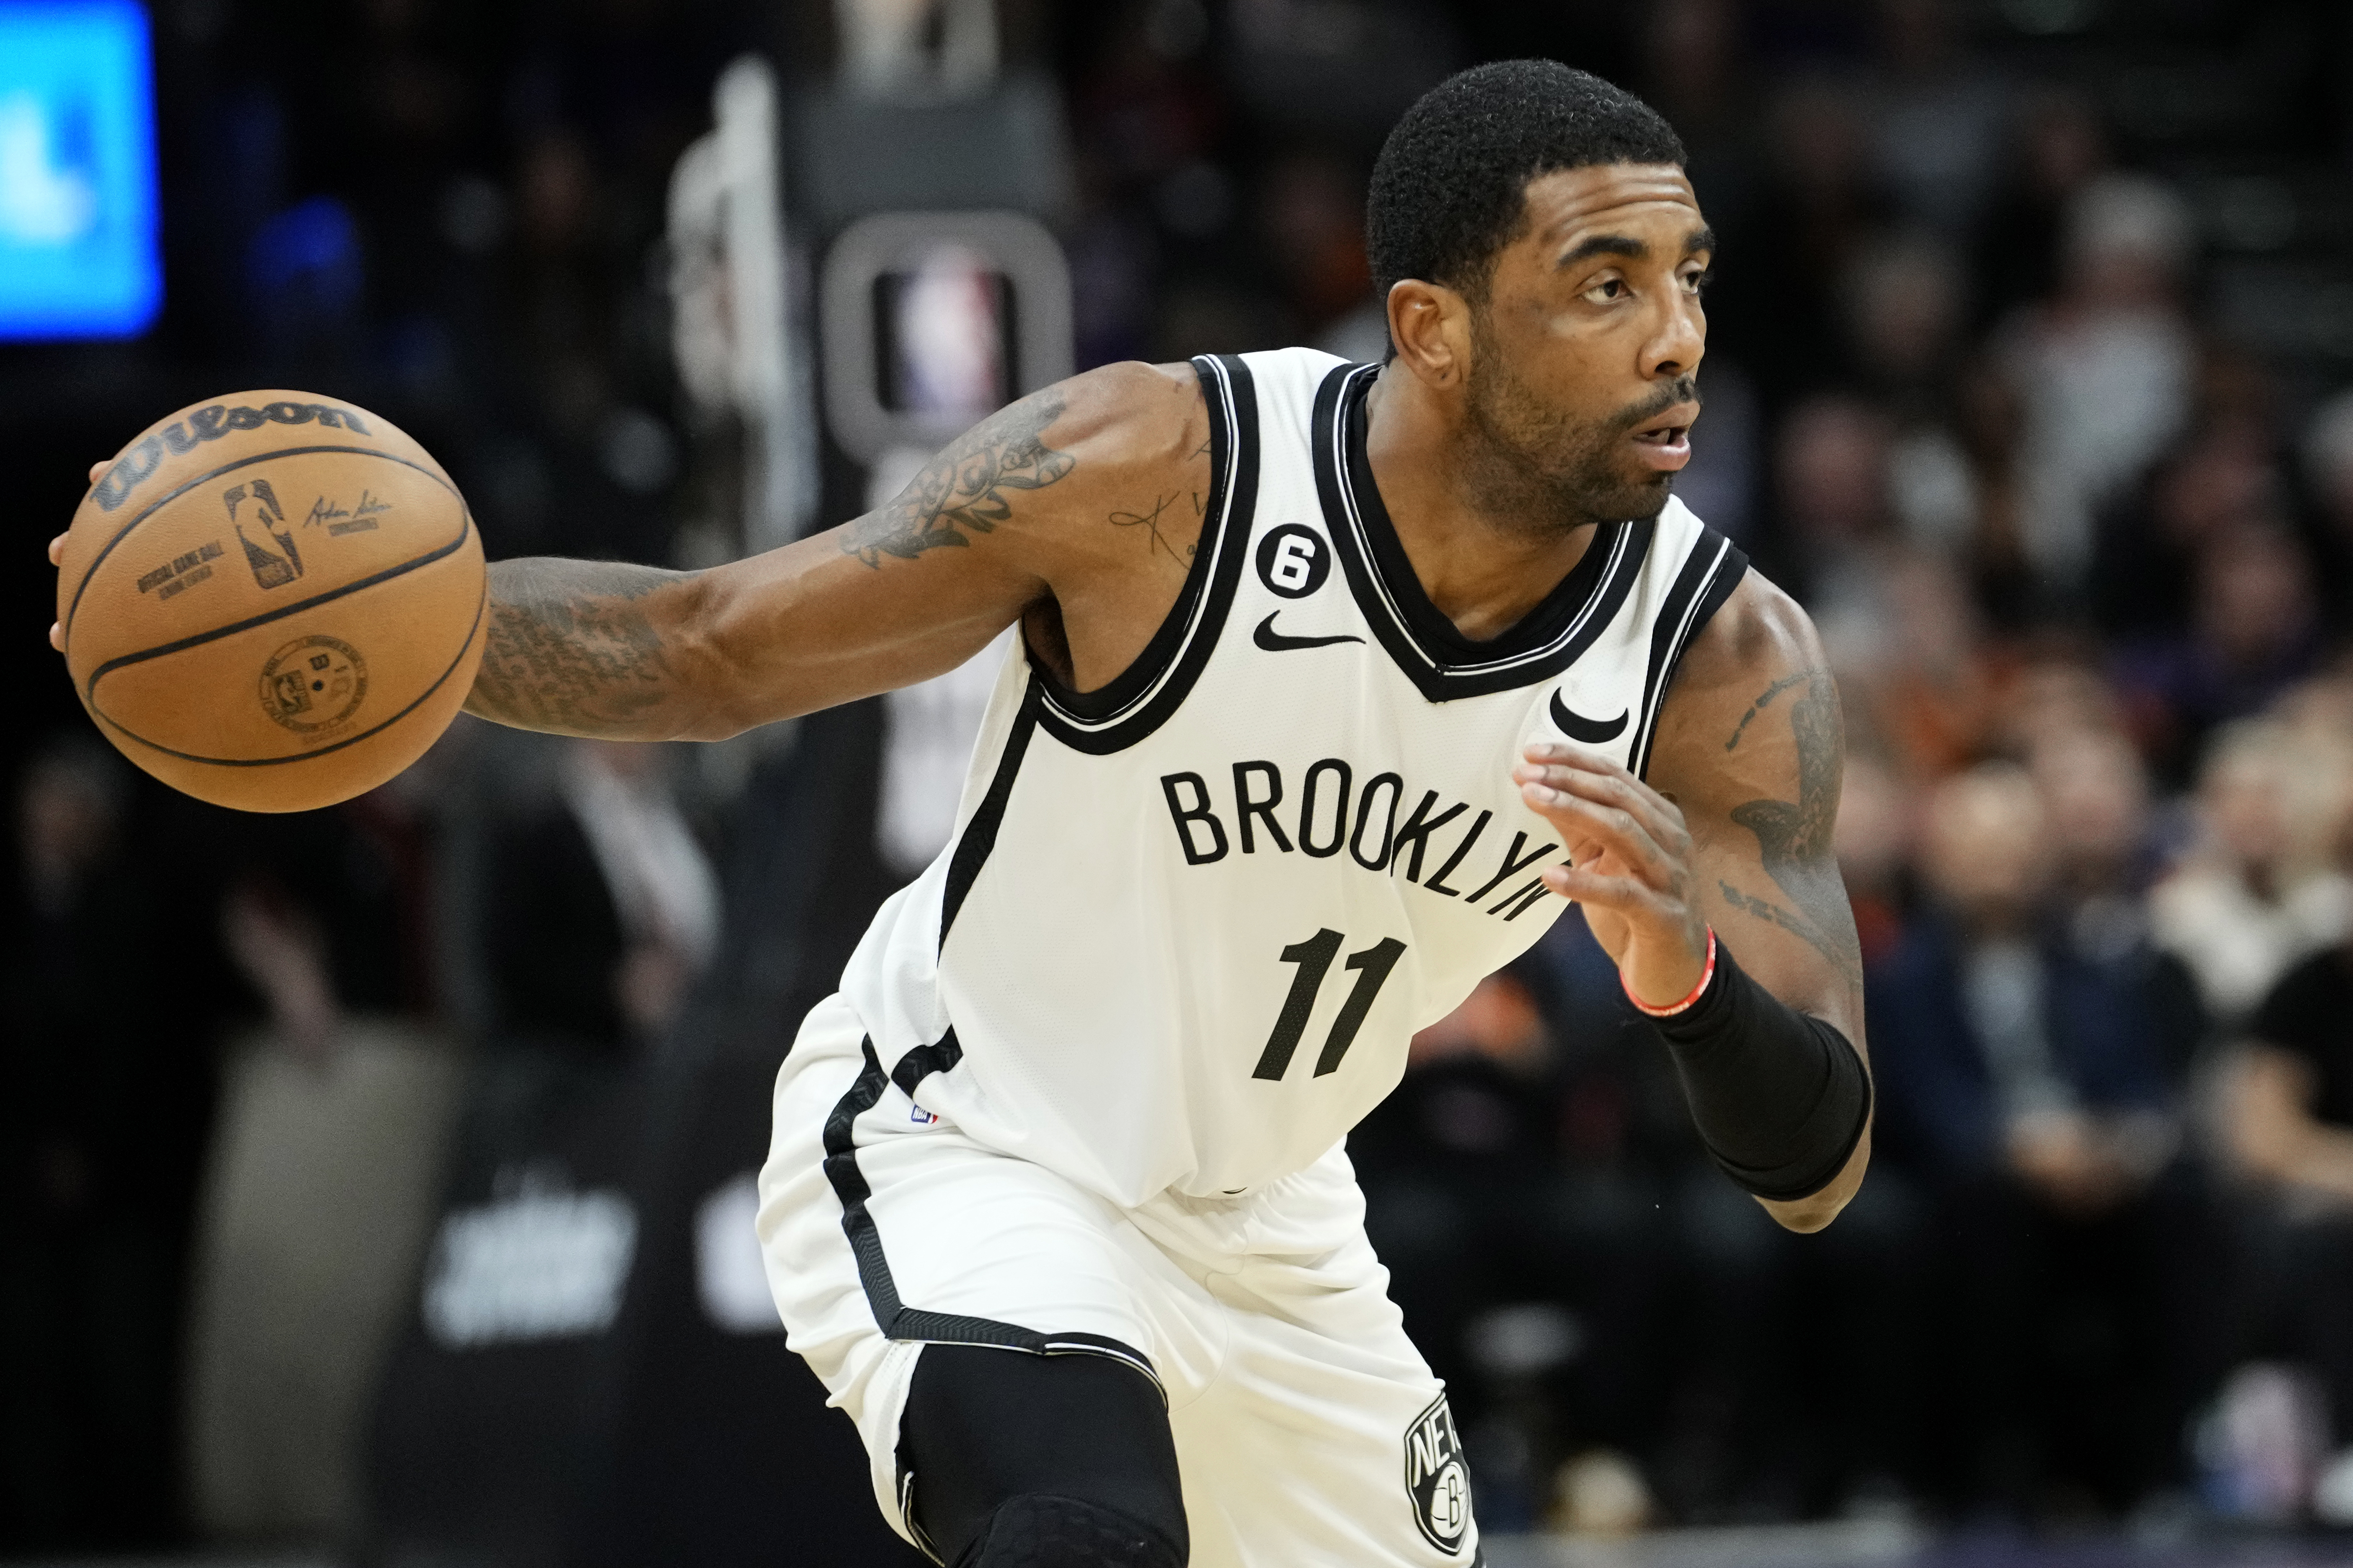 Knowing Kyrie Irving most likely he just didn't show up: NBA